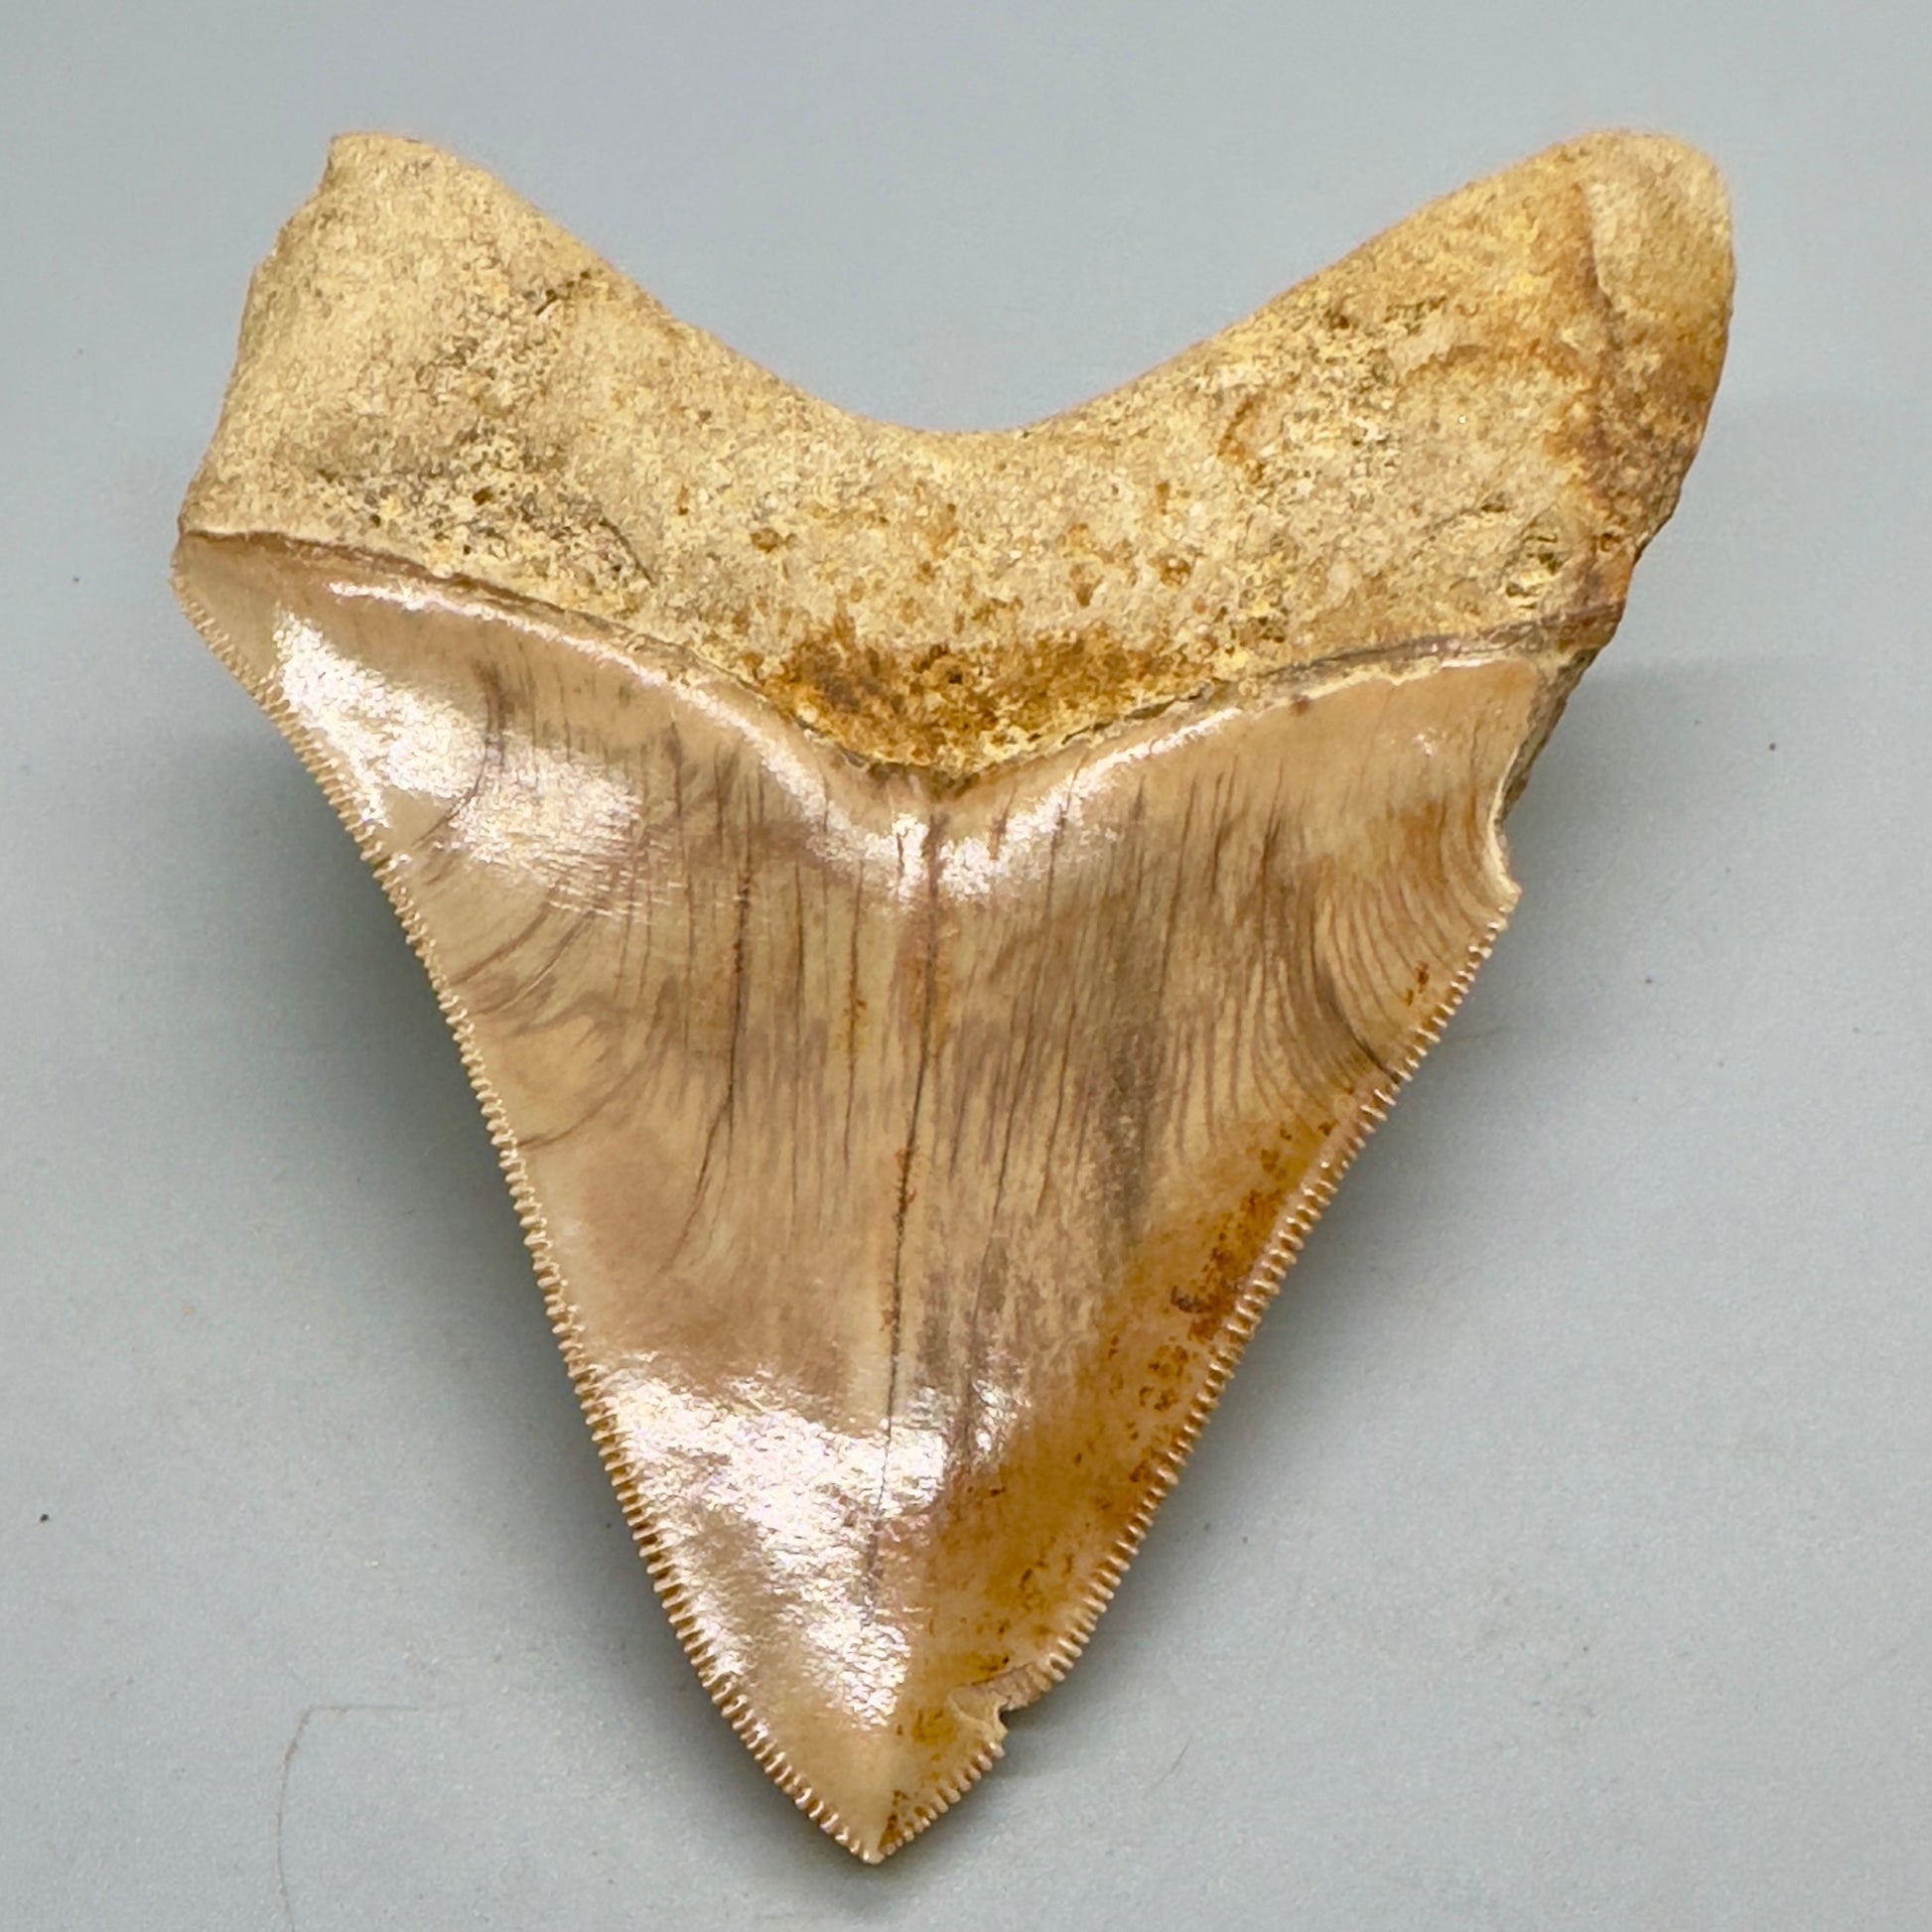 ndonesian Megalodon Tooth 4.39 inch serrated with orange hues CM4527 back down